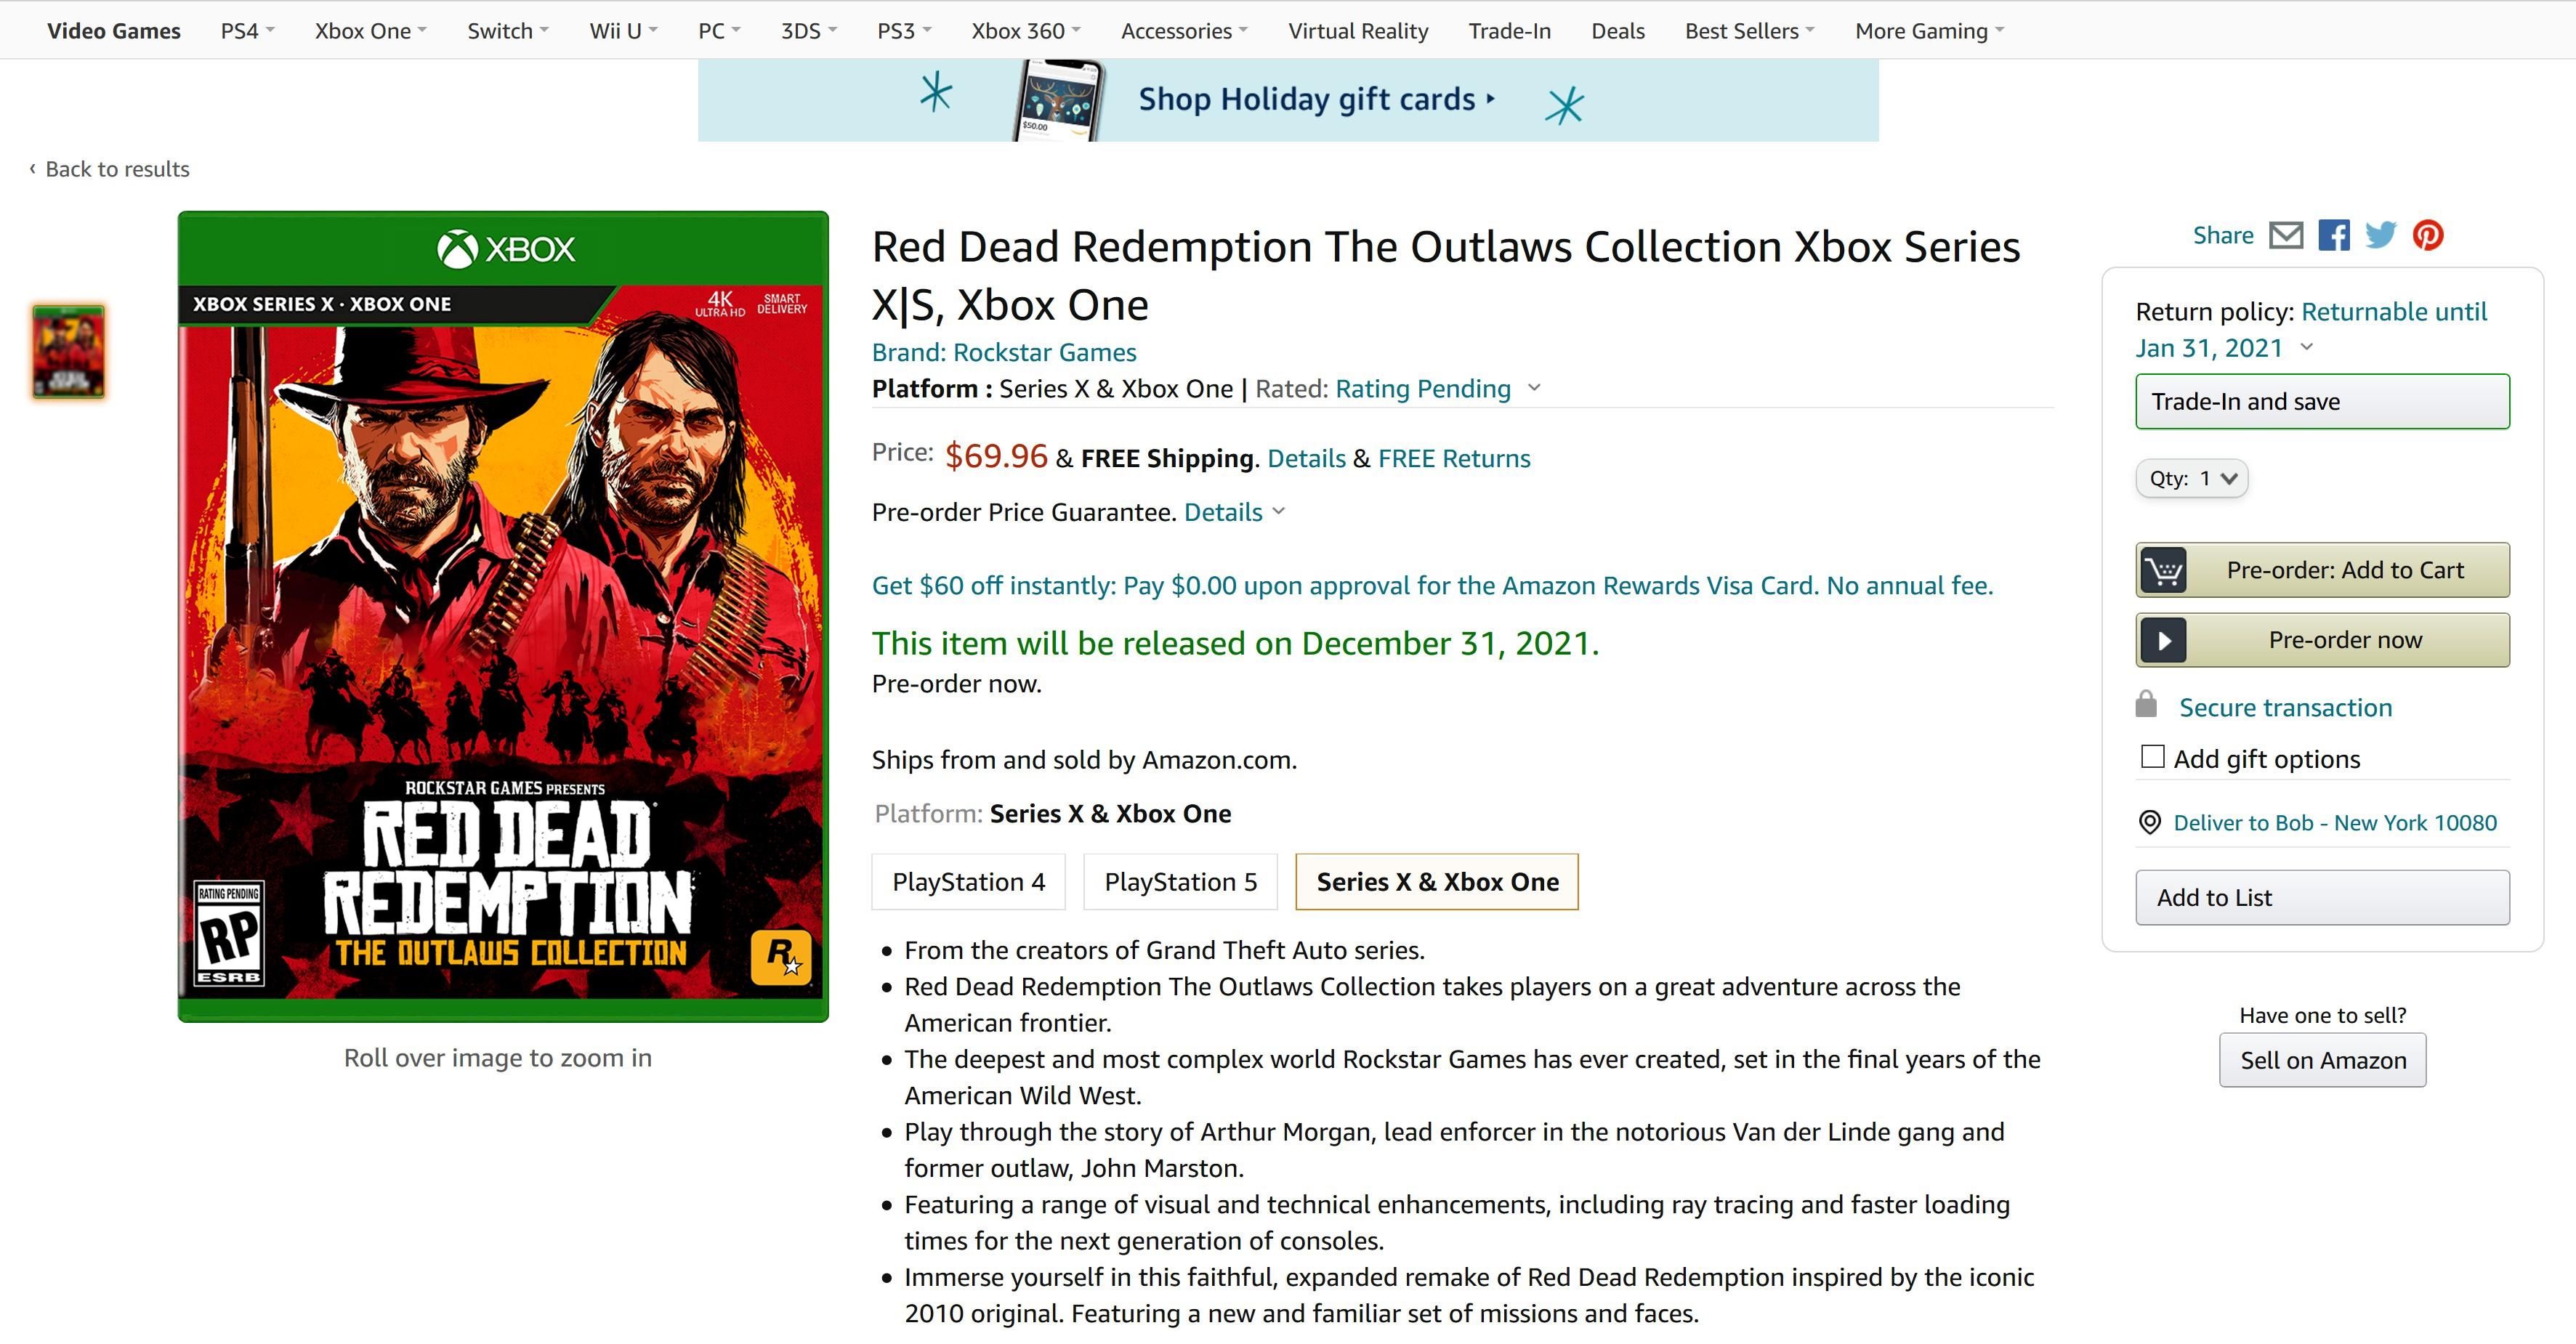 red dead redemption outlaws collection xbox